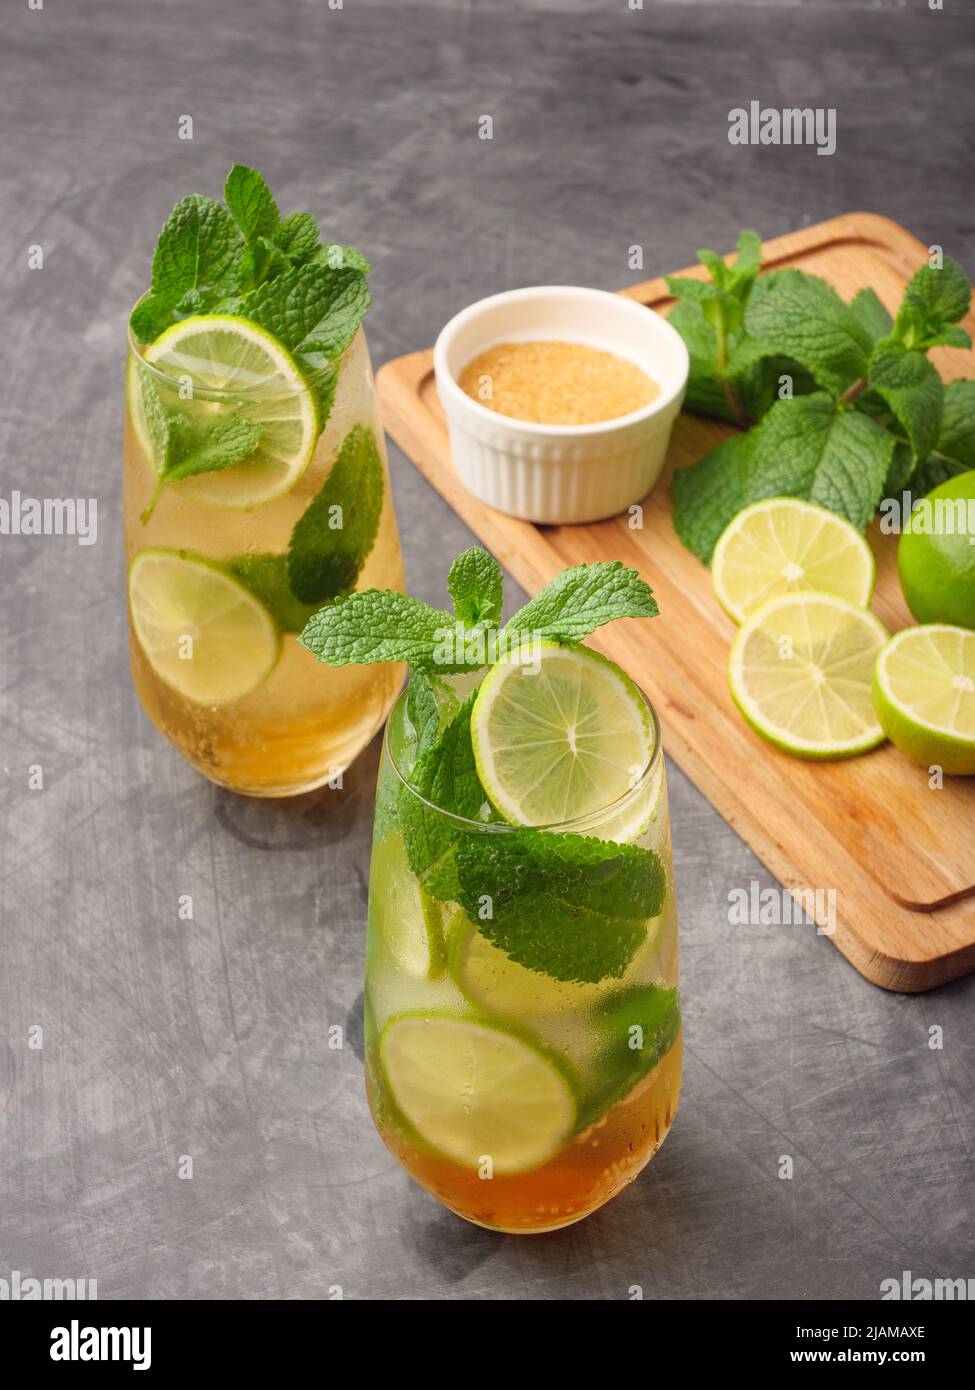 Mojito or virgin mojito long rum drink with fresh mint, lime juice, cane sugar and soda. Stock Photo